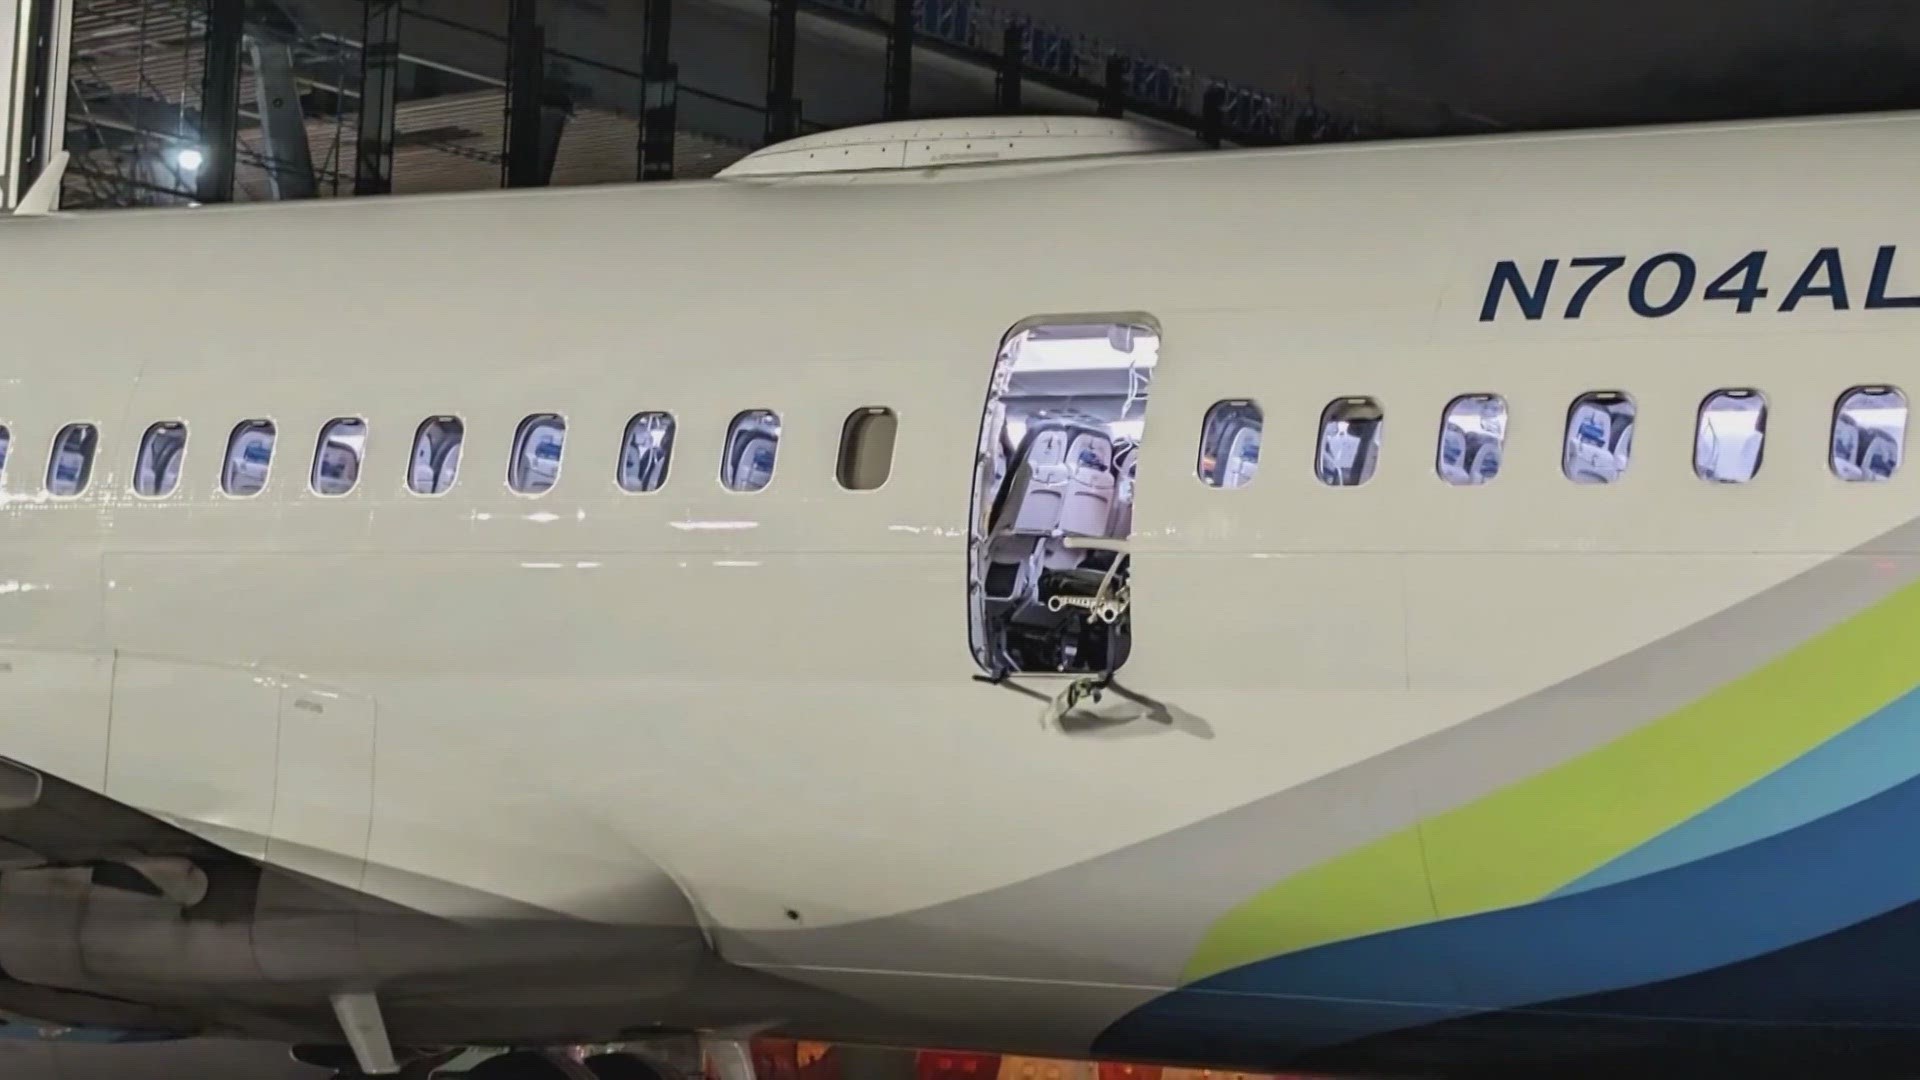 A photo obtained from Boeing shows the door plug reattached to the plane without bolts that were intended to prevent the door plug from moving vertically.